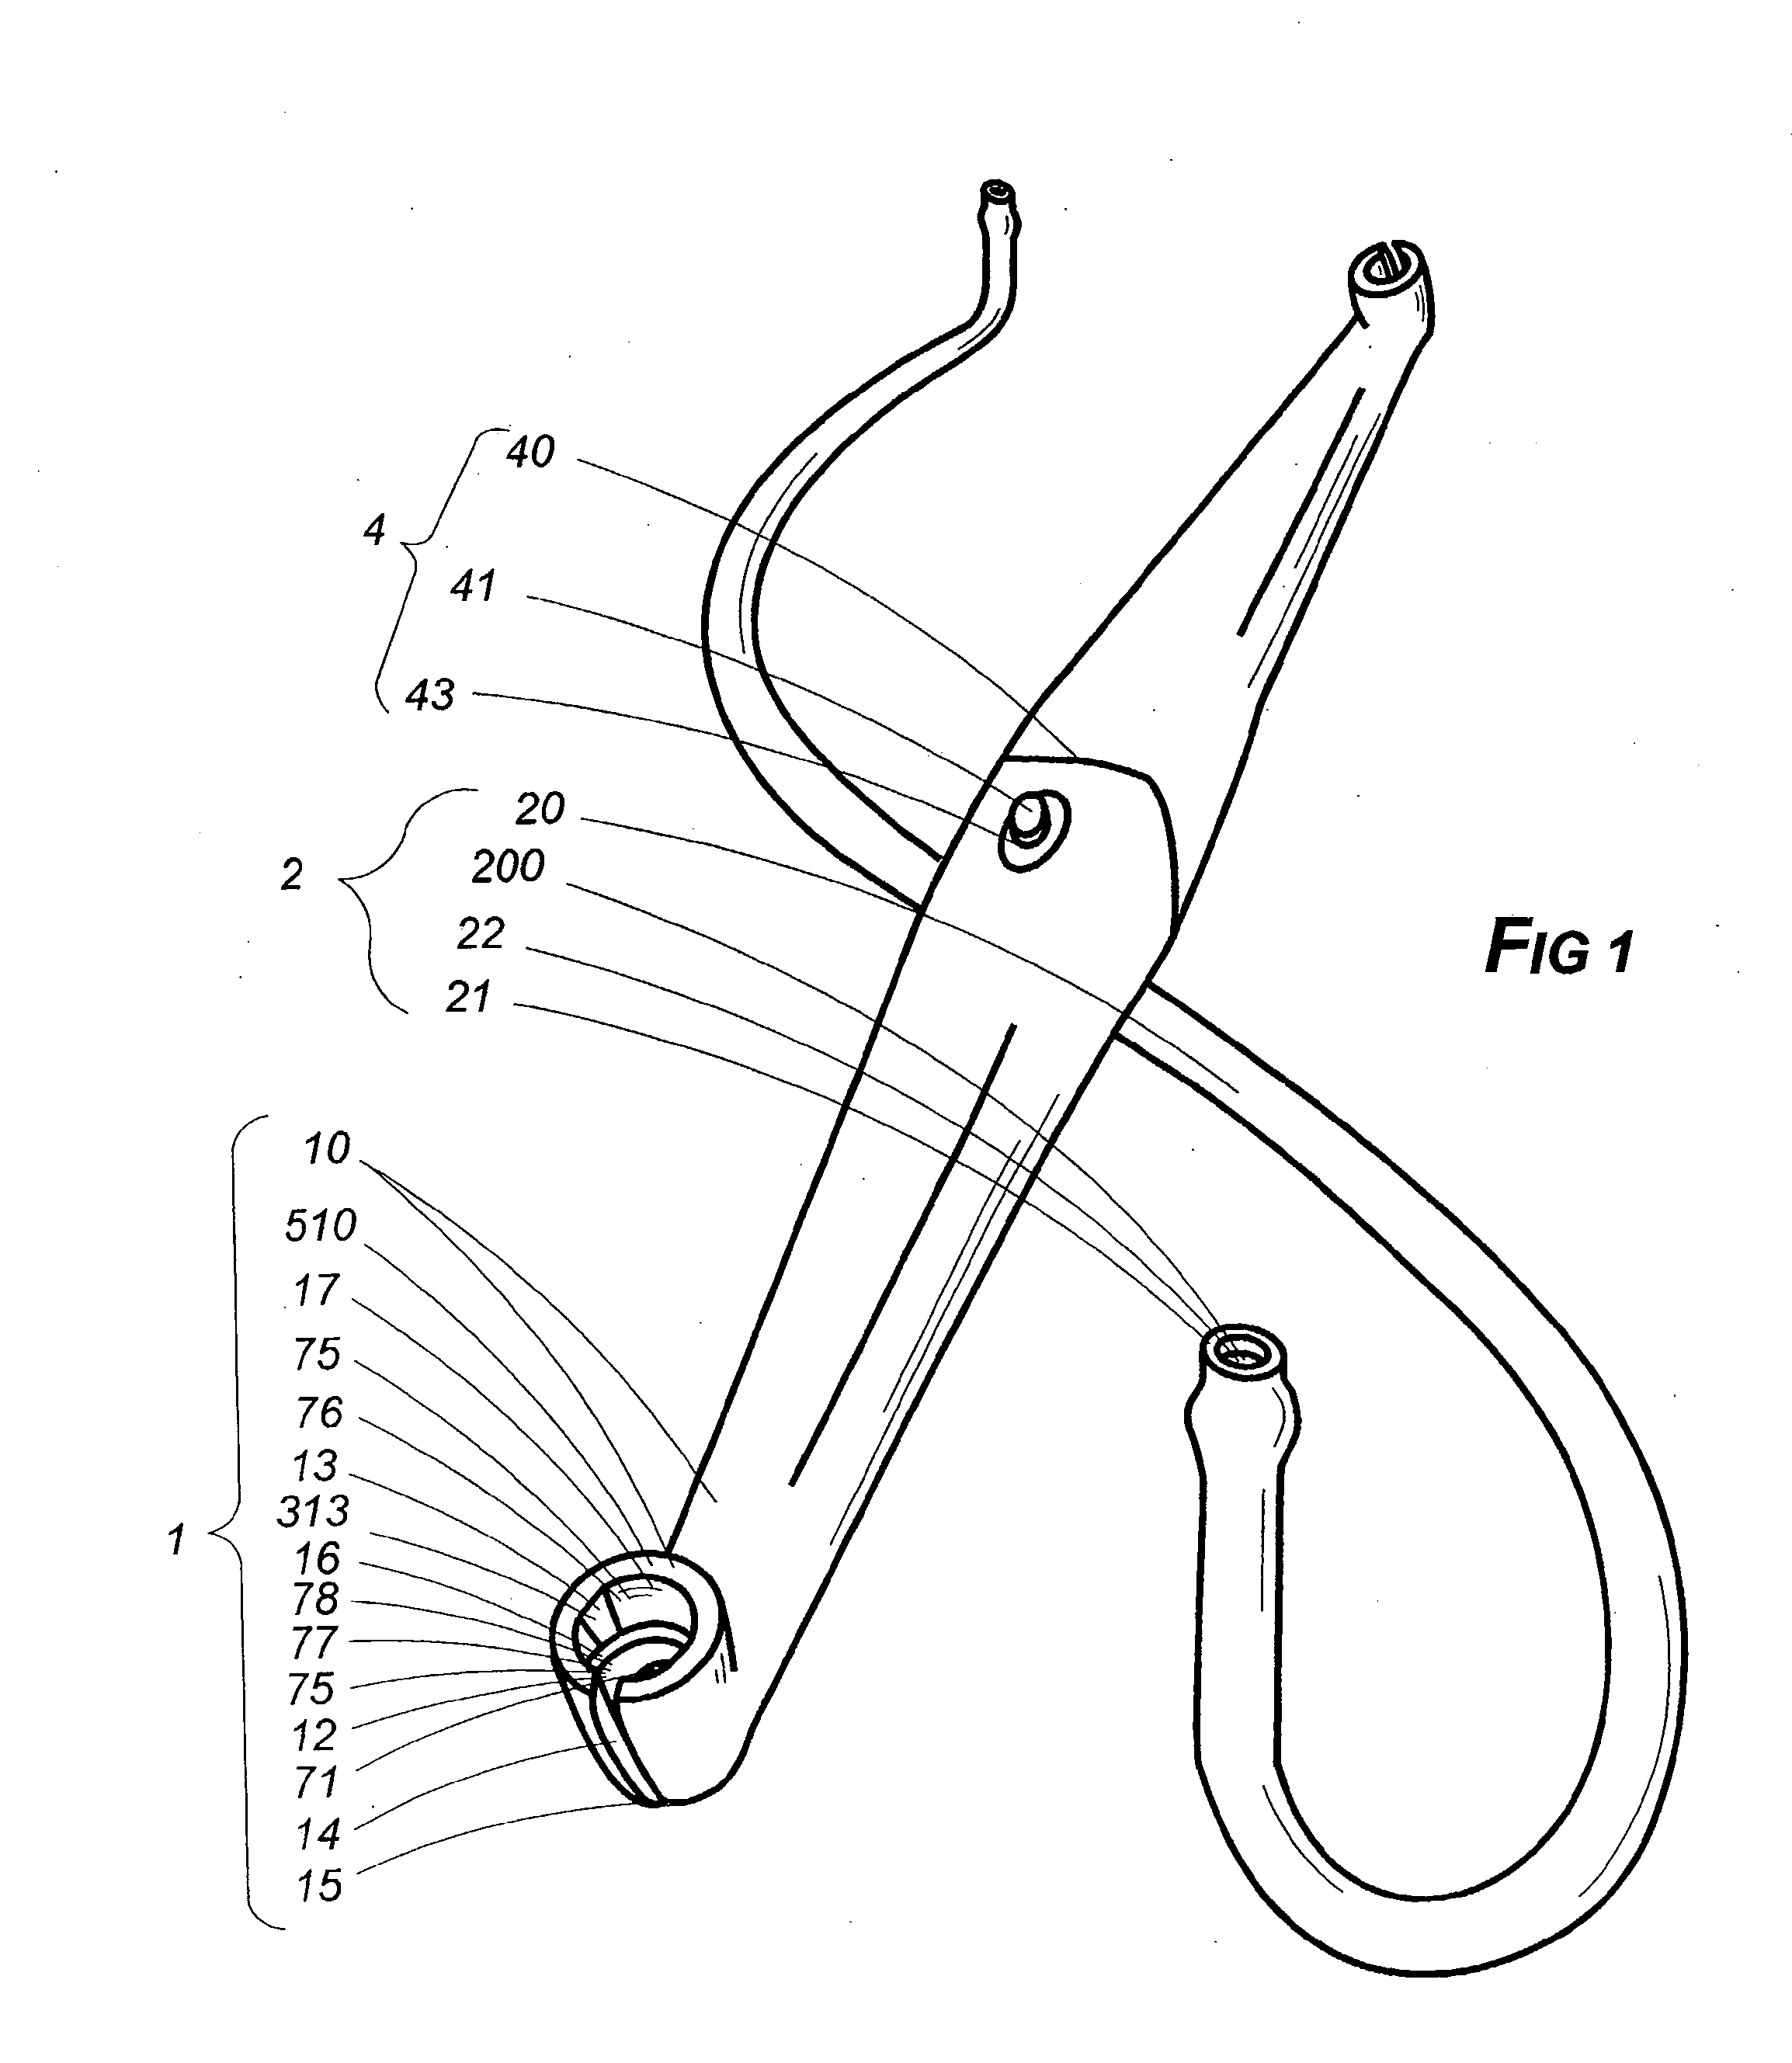 Reinforced cord well lifting bar assembly